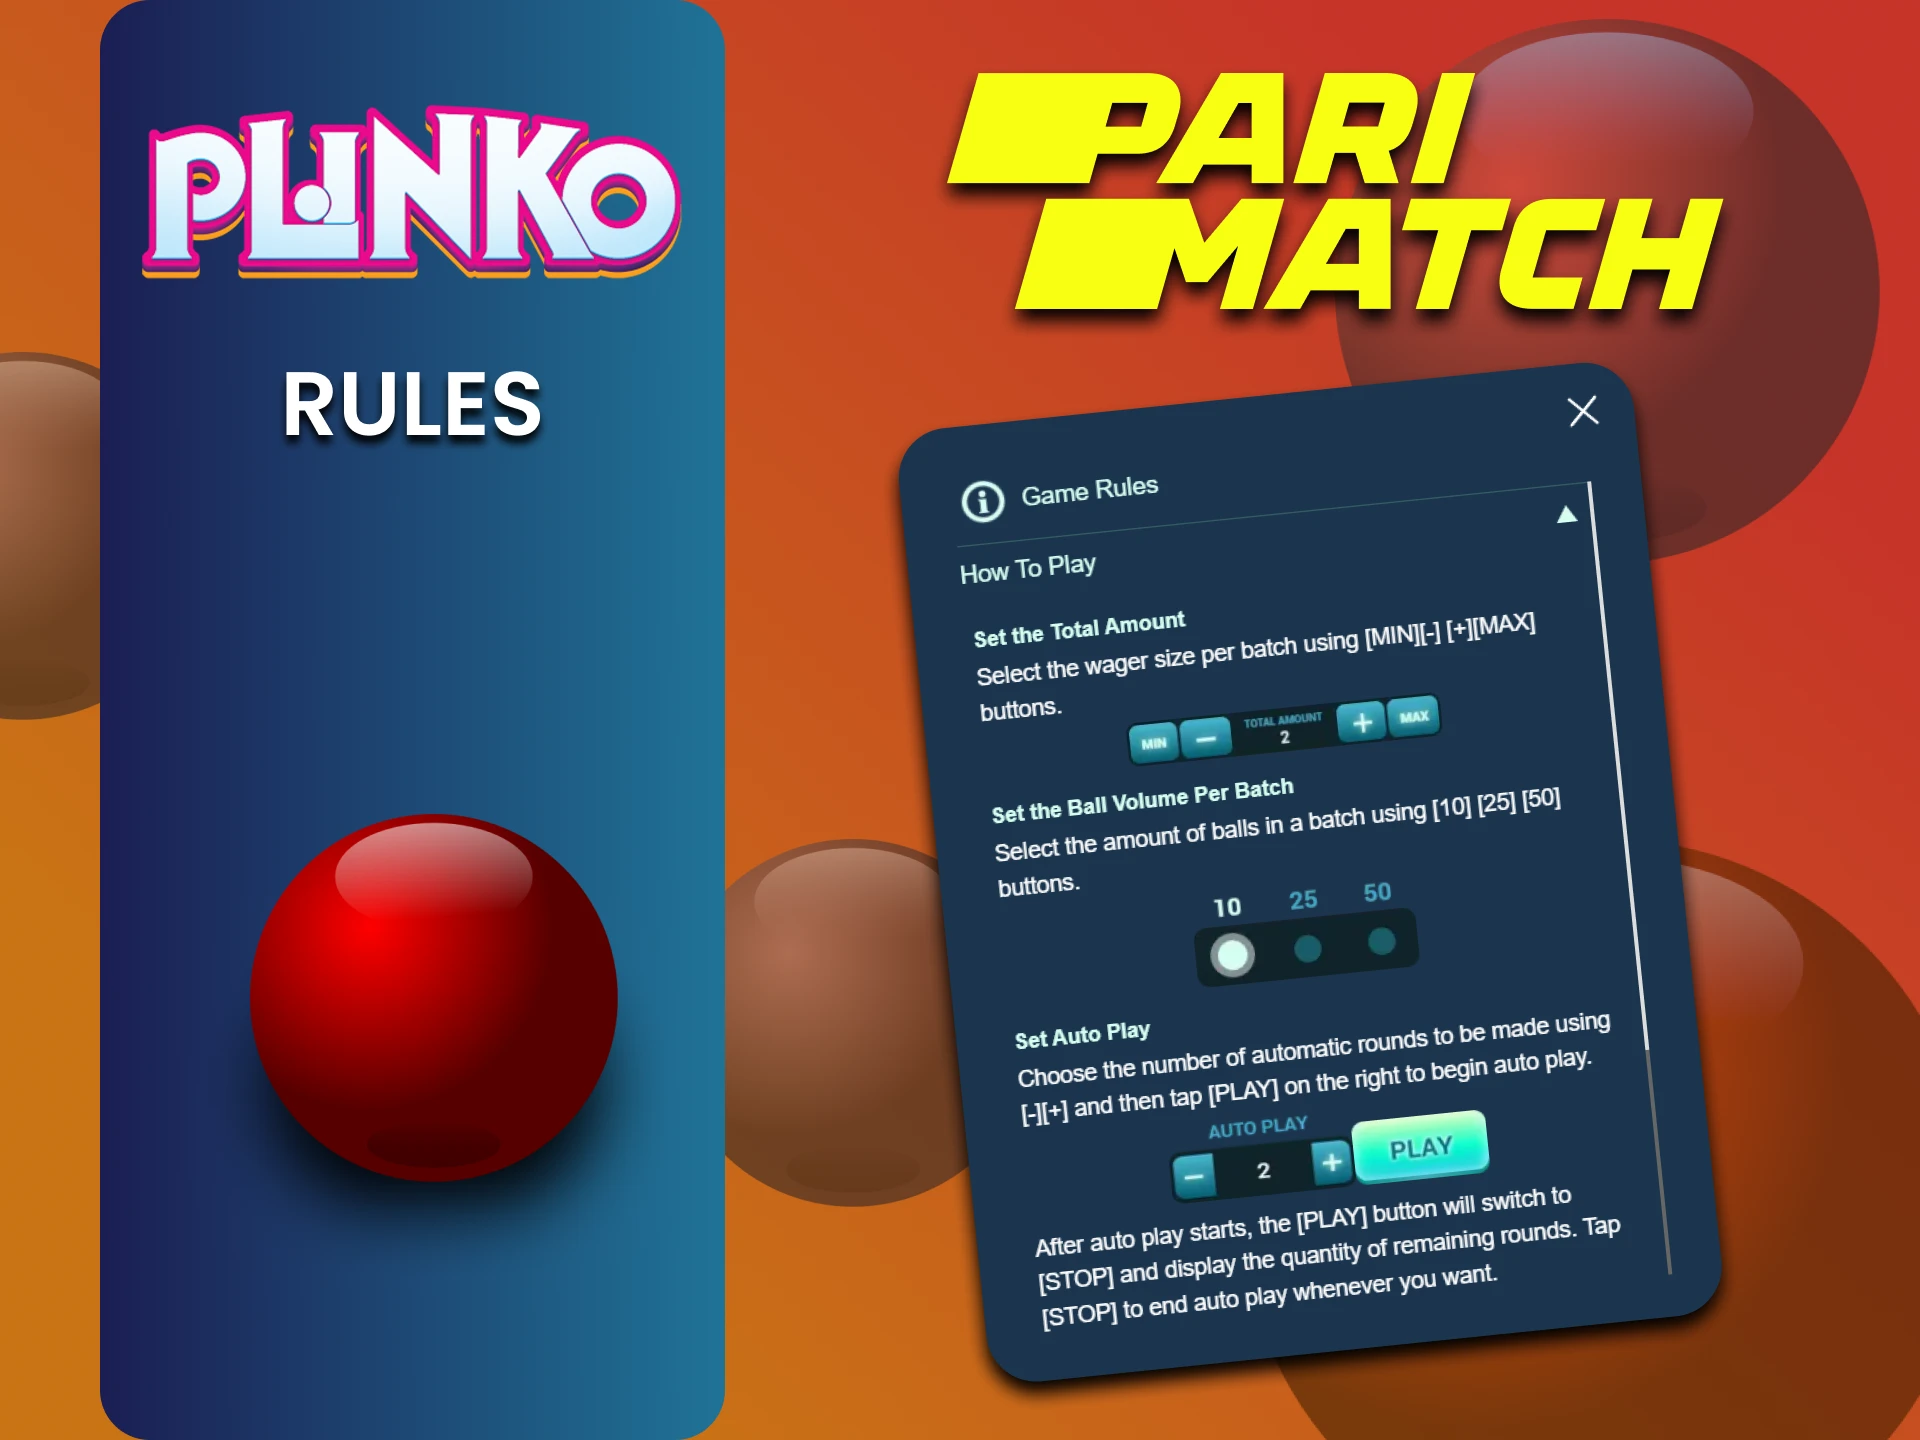 Learn the rules of the Plinko game on Parimatch.